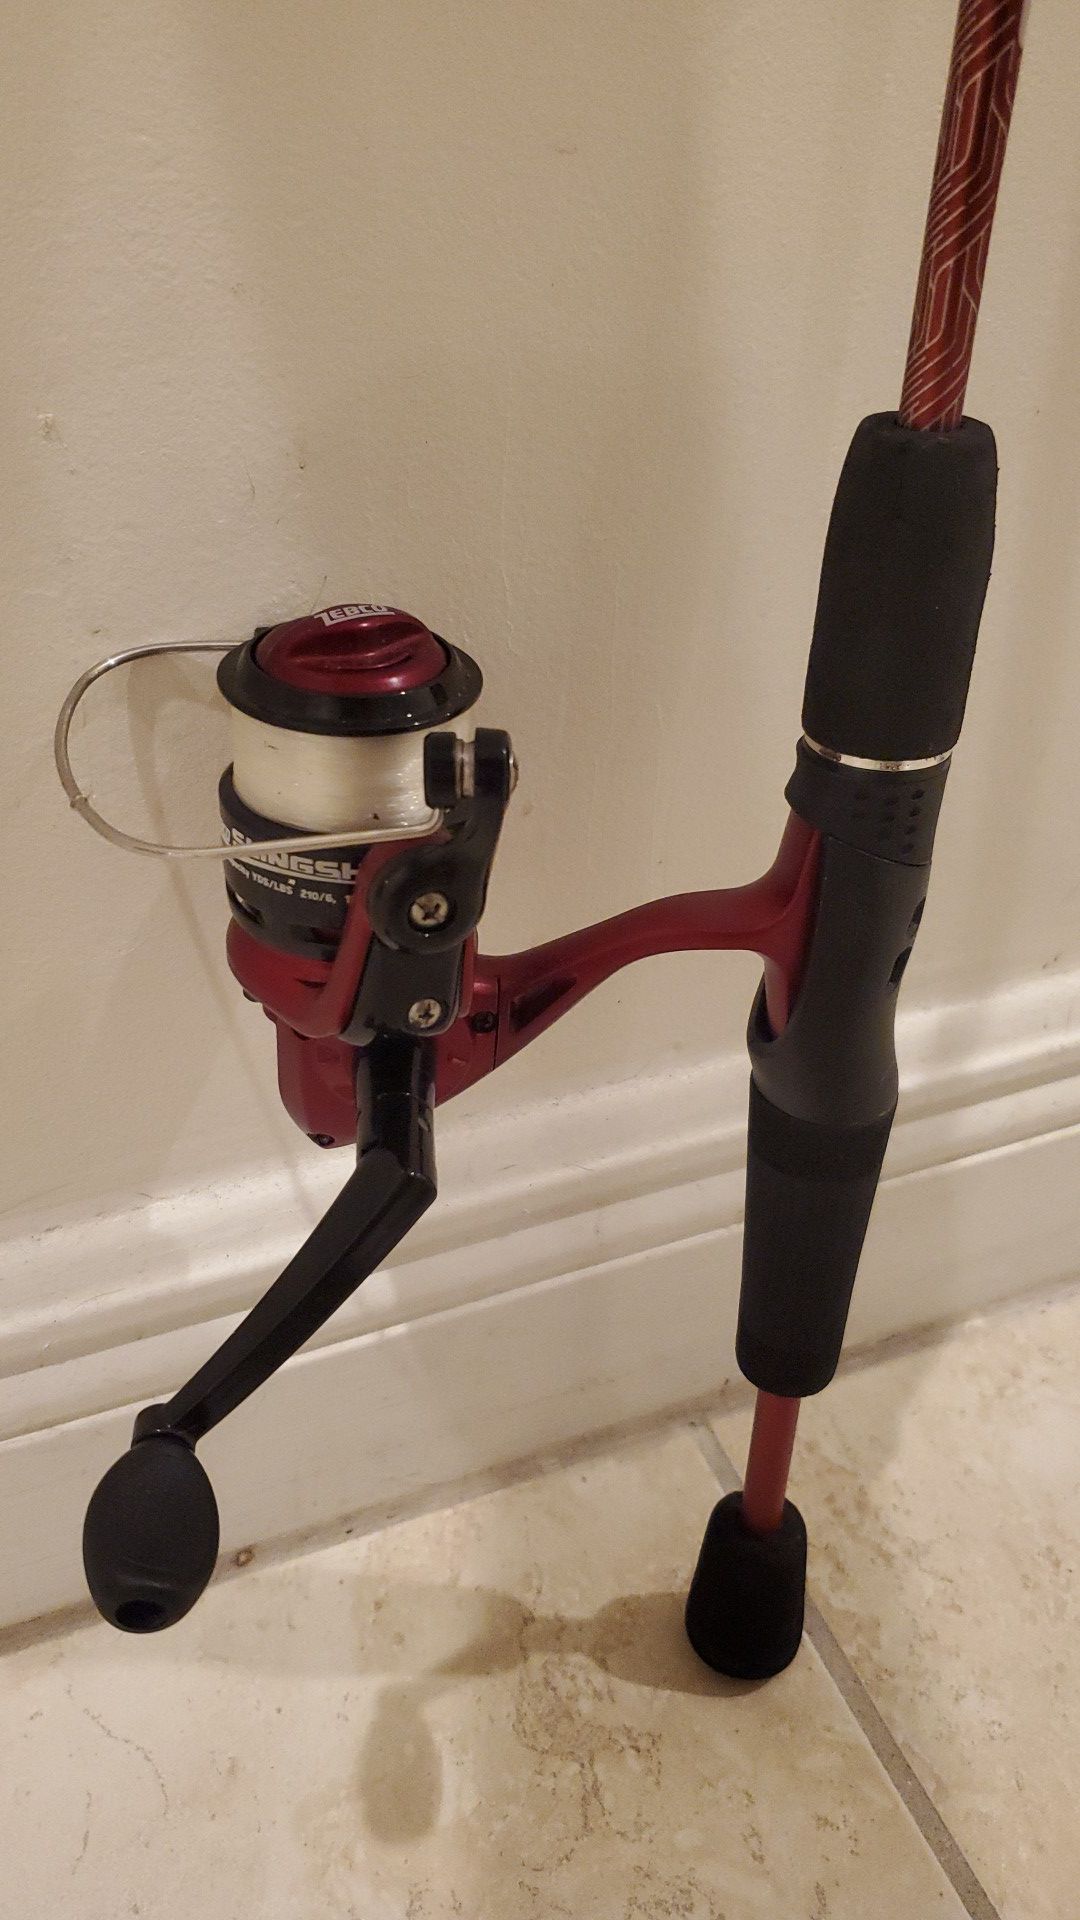 Zebco Slingshot fishing rod pole and reel with a tackle box